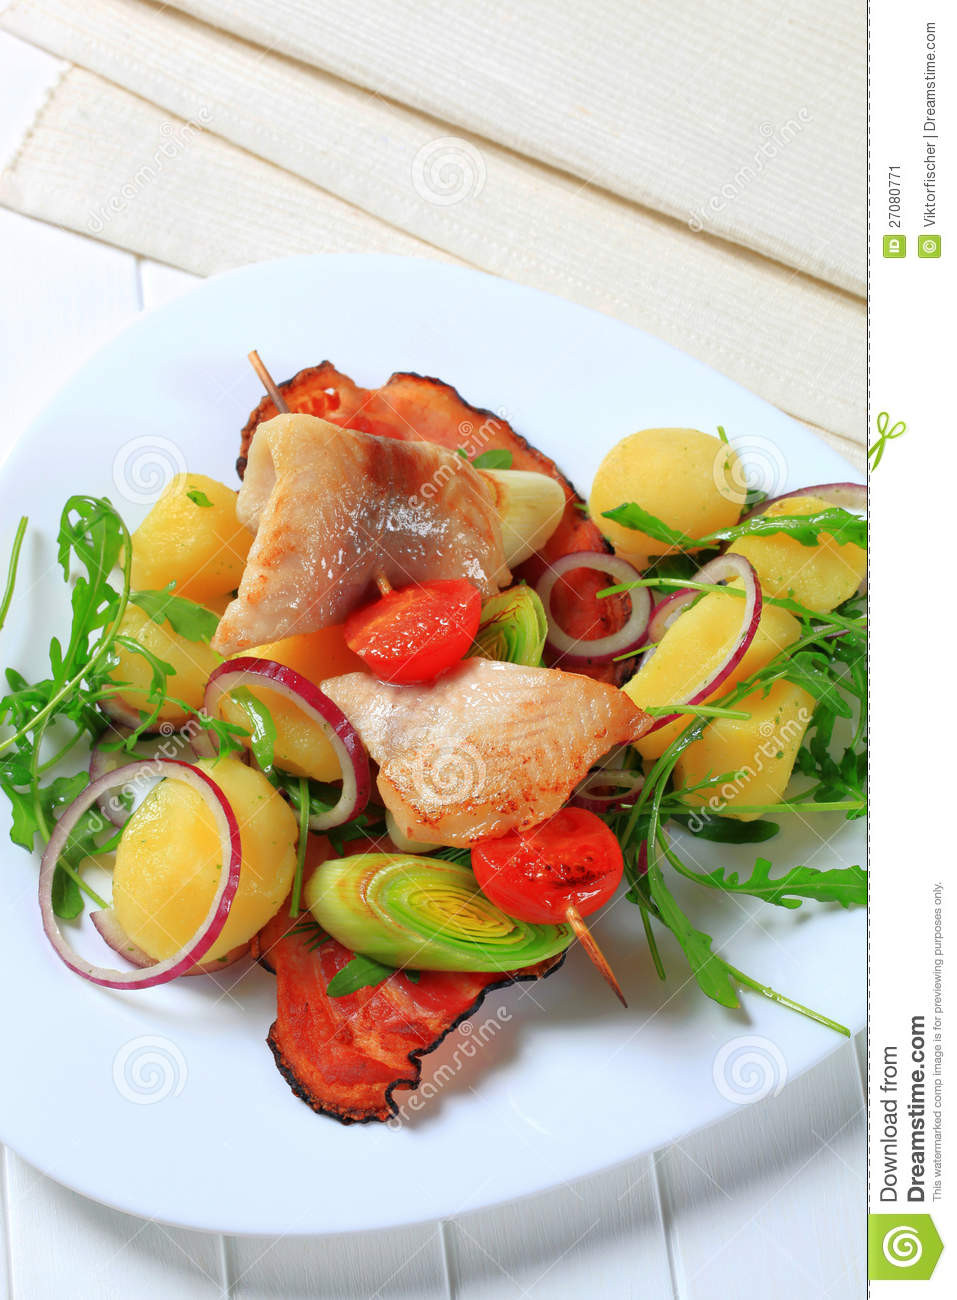 Potato Side Dishes For Fish
 Fish Skewer With Potato Side Dish Stock Image Image of